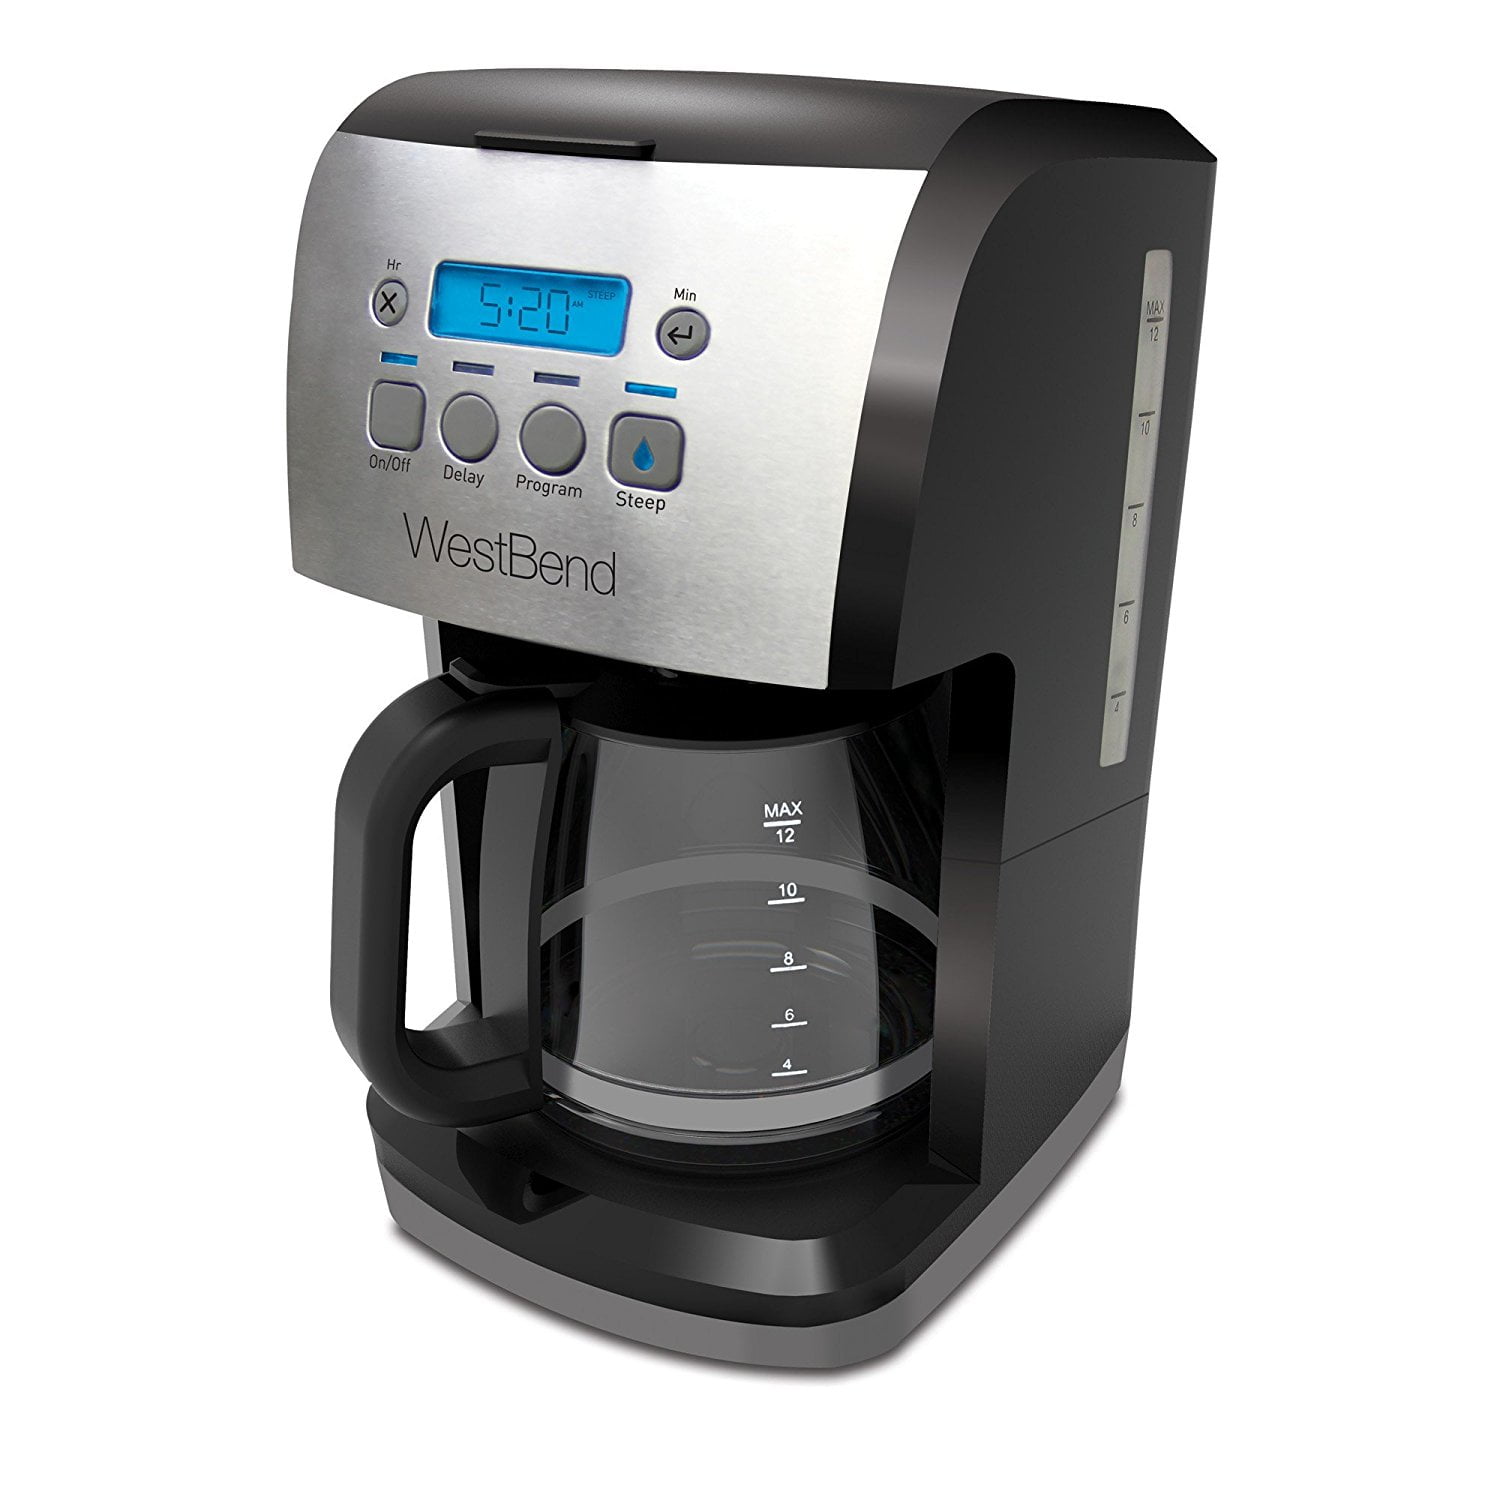 West Bend Steep& Brew 12-Cup 56911 Coffee Maker Review - Consumer Reports